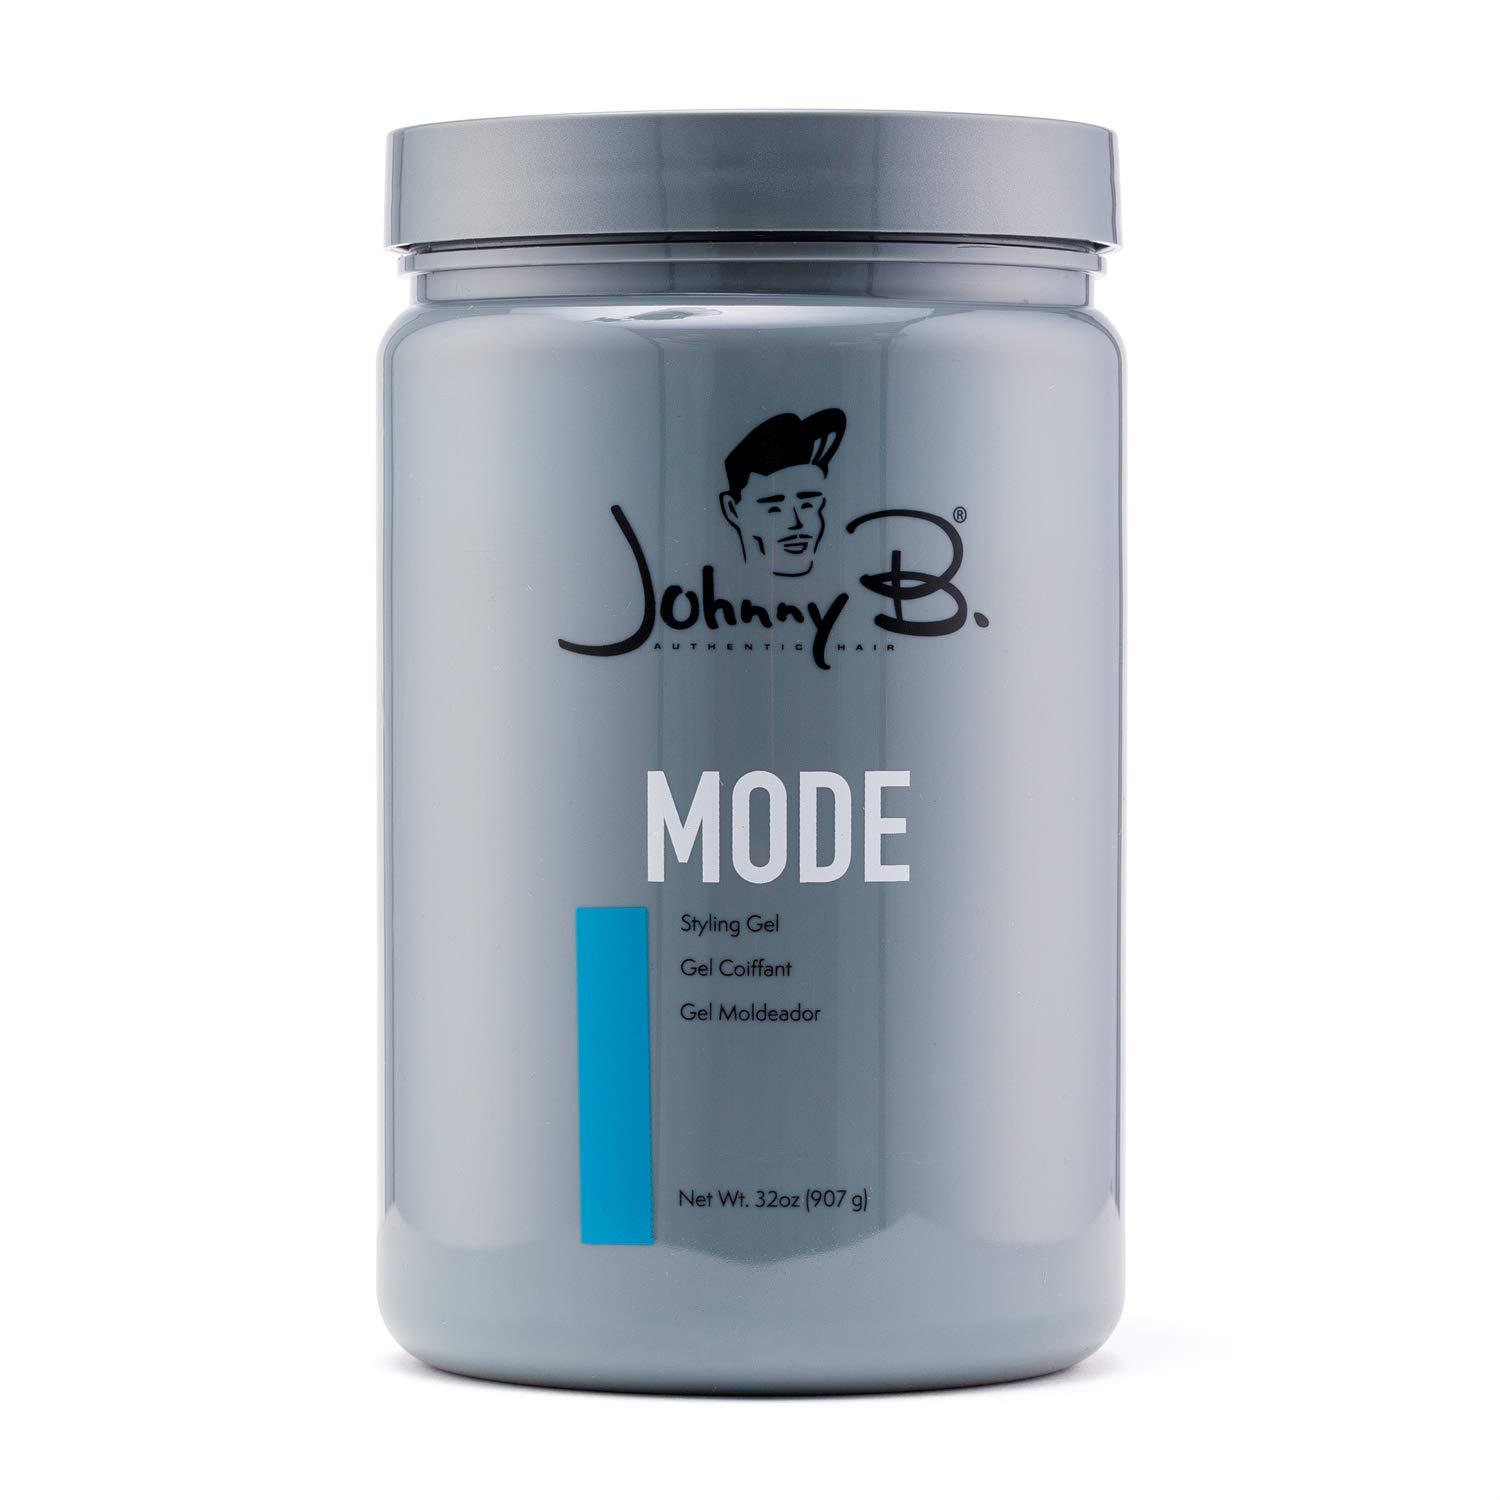 Johnny B Mode Styling Gel for $18.90